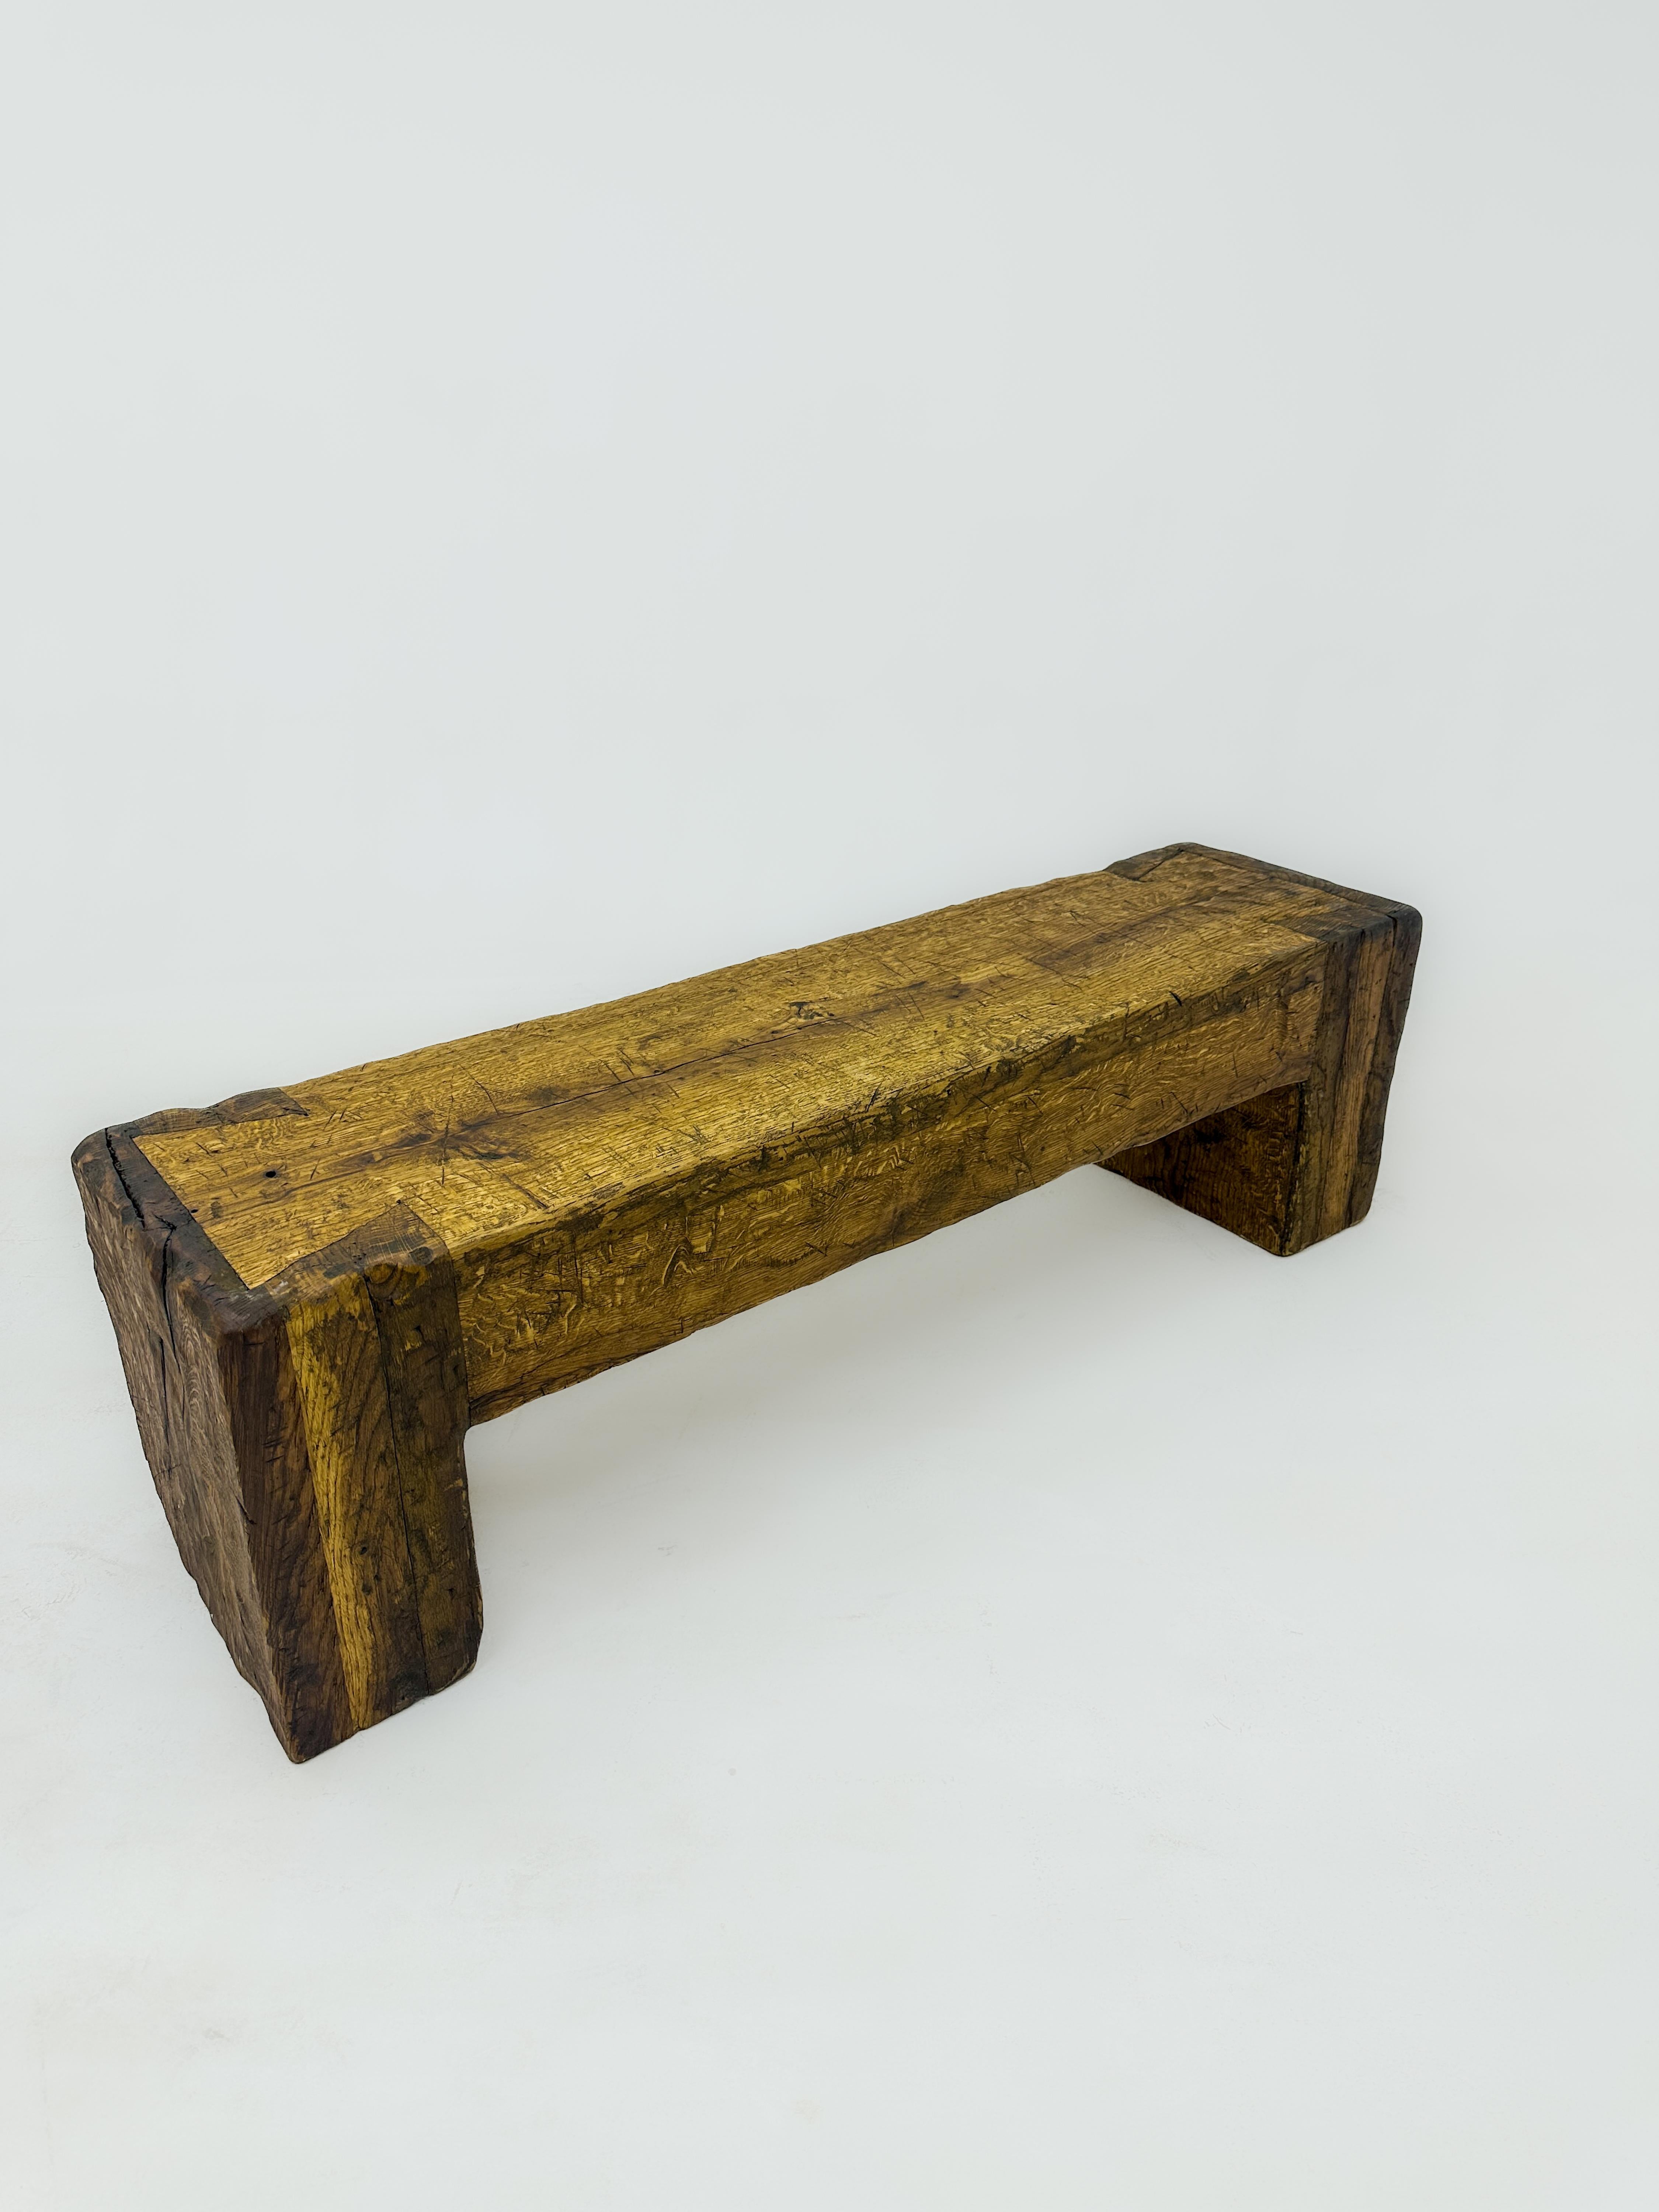 CHESTNUT SOLID WOOD BENCH

Meet our Chestnut Solid Wood Bench – a stylish seat for your space. Made from high quality chestnut wood, it's got a warm, rich color that shows off the wood's natural beauty.

This bench is classic and fits in anywhere,